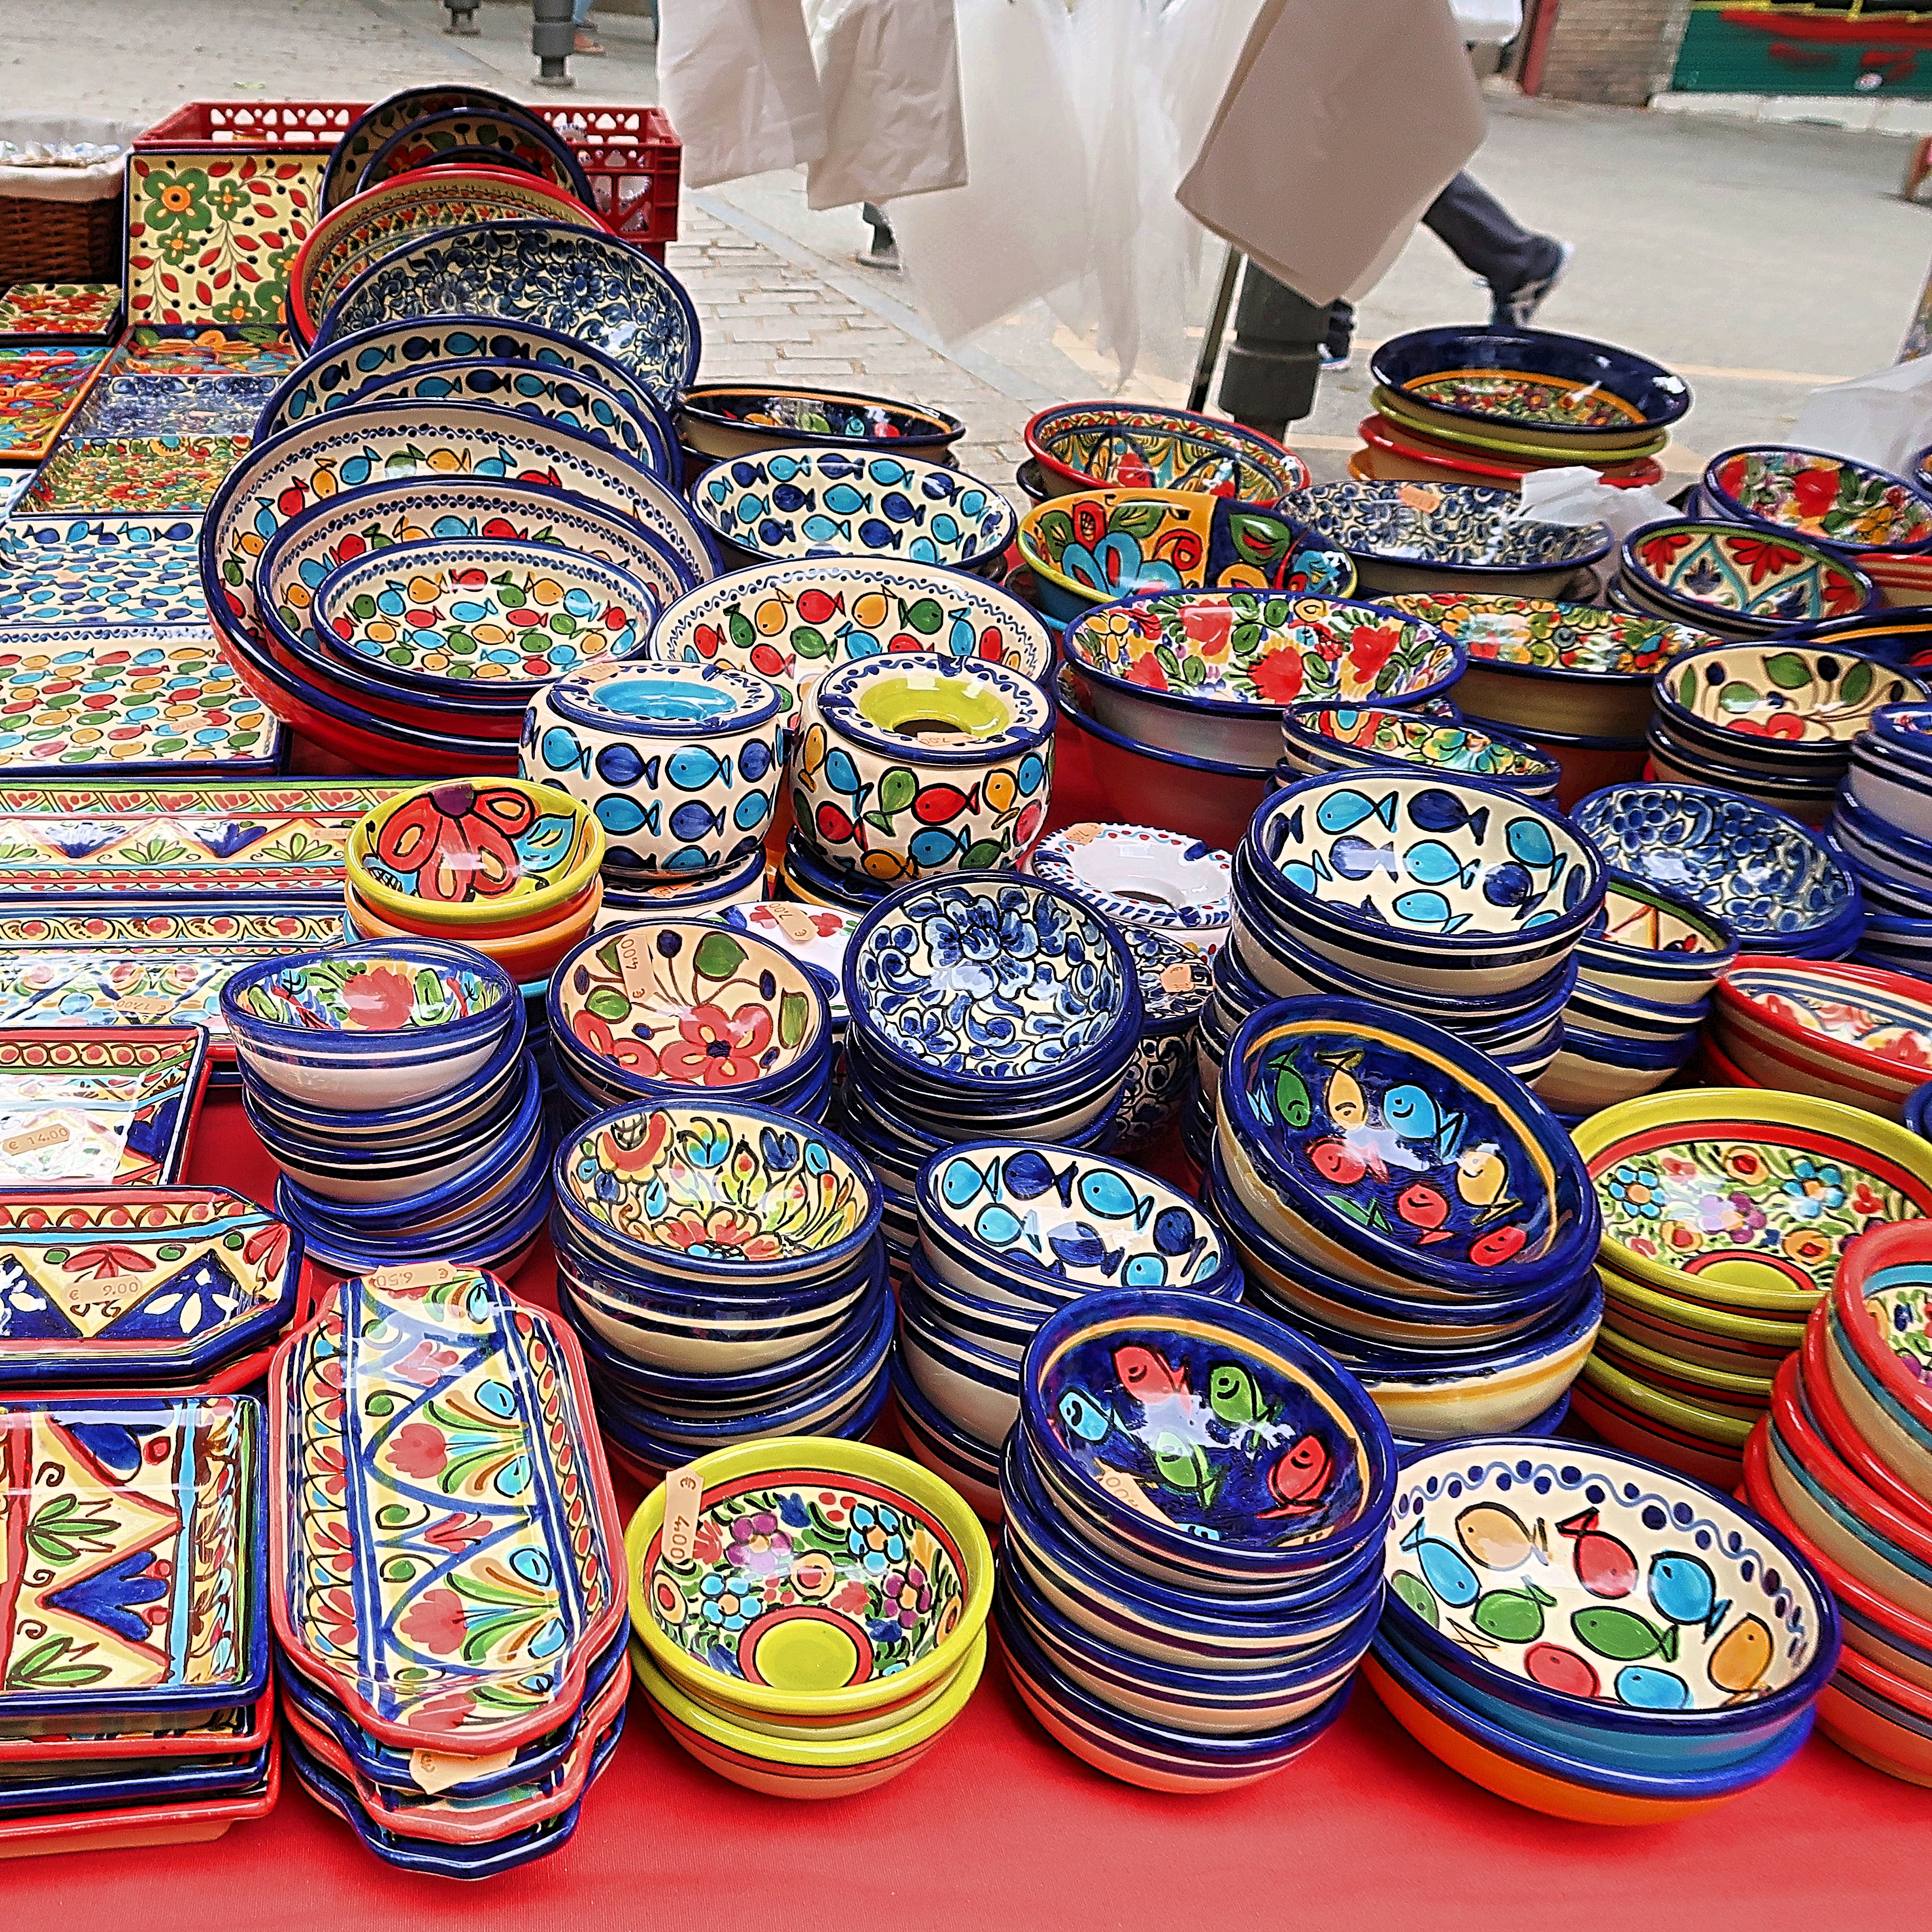 Market stall with colourful crockery at El Rastro 